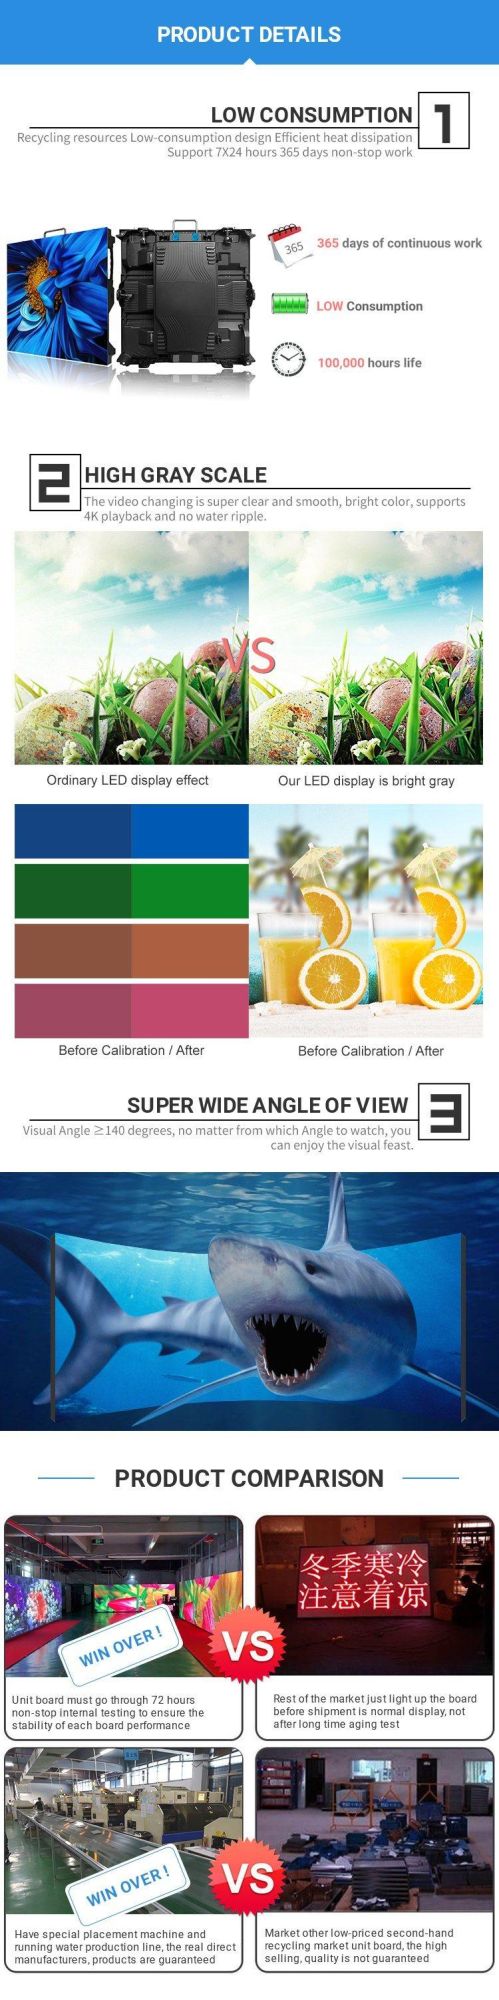 P2.3 RGB SMD Indoor LED Display LED Screen